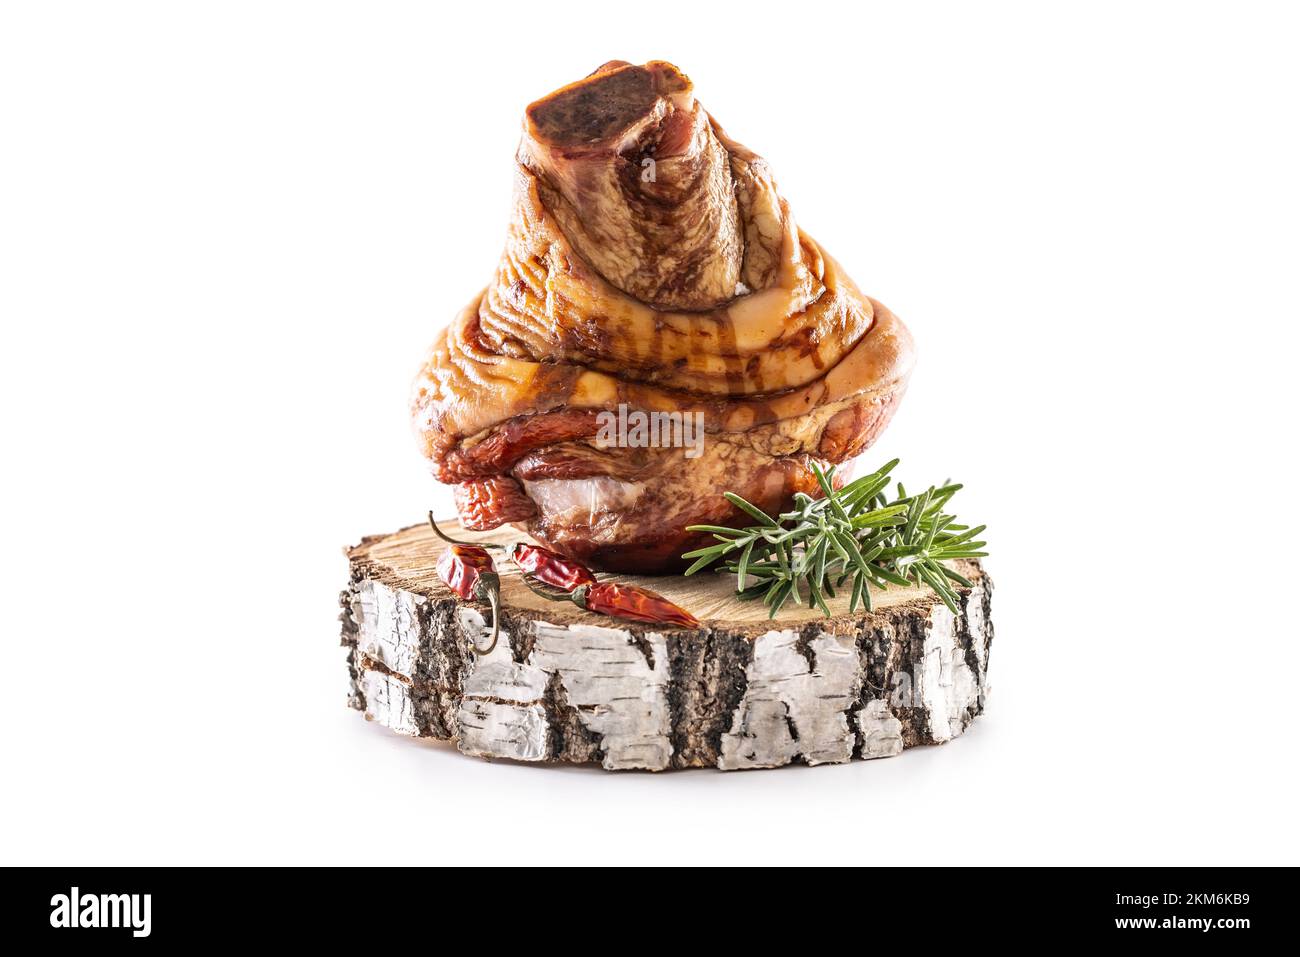 Smoked pork Bavarian knee with rosemary and chili peppers on birch wood - isolated on white. Stock Photo